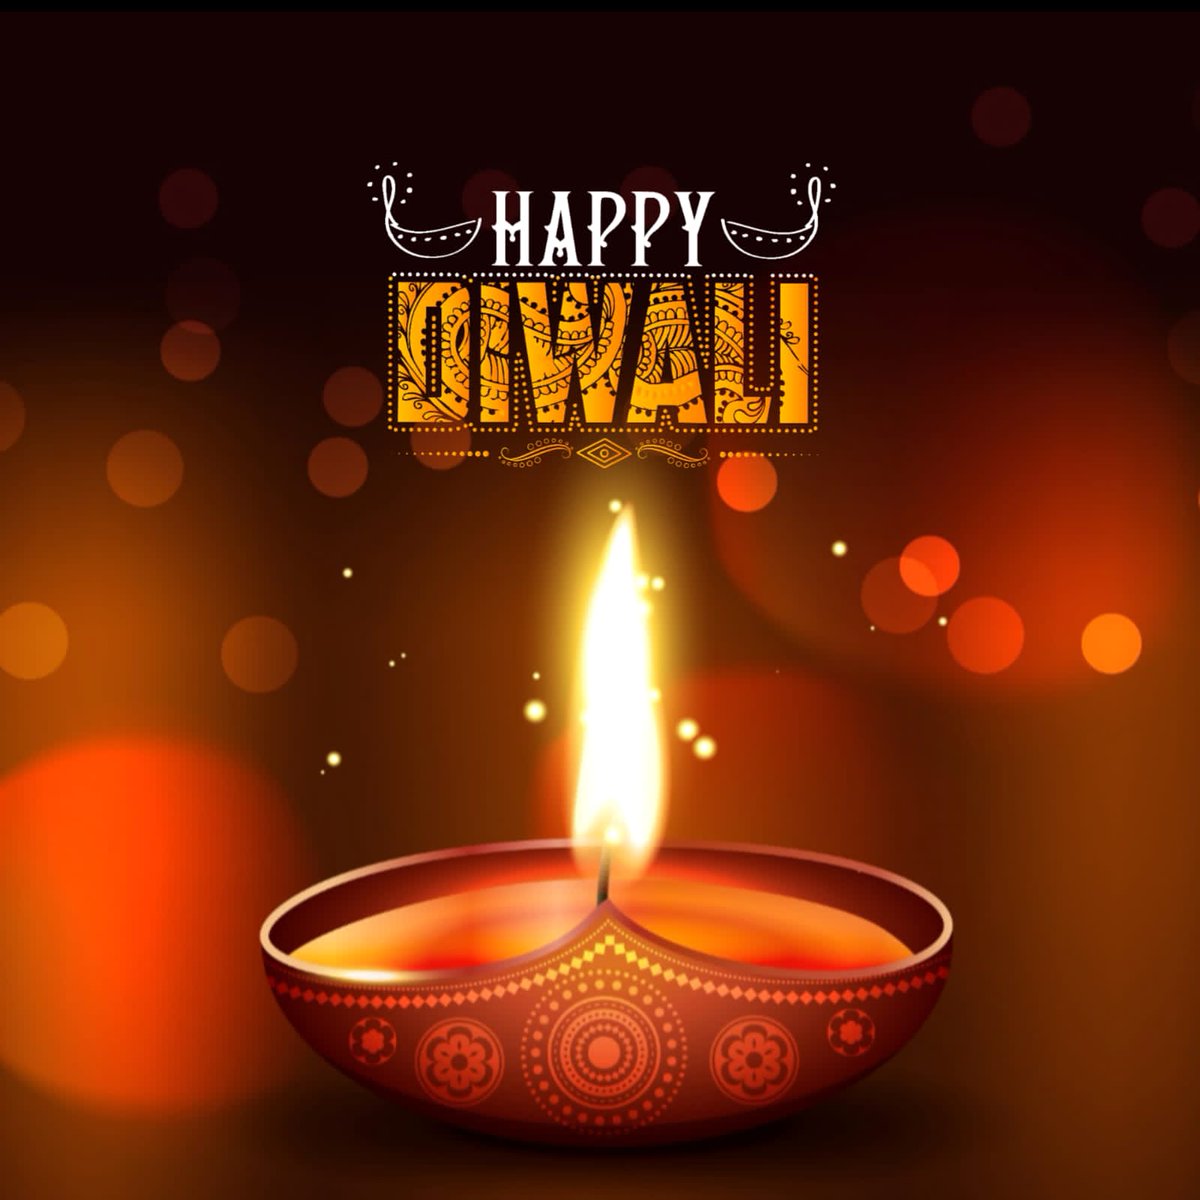 On the auspicious and Joyous occasion of #Diwali, SSP Ganderbal Shri Nikhil Borkar-IPS extends warm Diwali greetings to J&K Police Pariwar, Family of the Martyrs and Citizens. May the festival of lights brings peace, happiness and prosperity for all. @JmuKmrPolice @KashmirPolice…